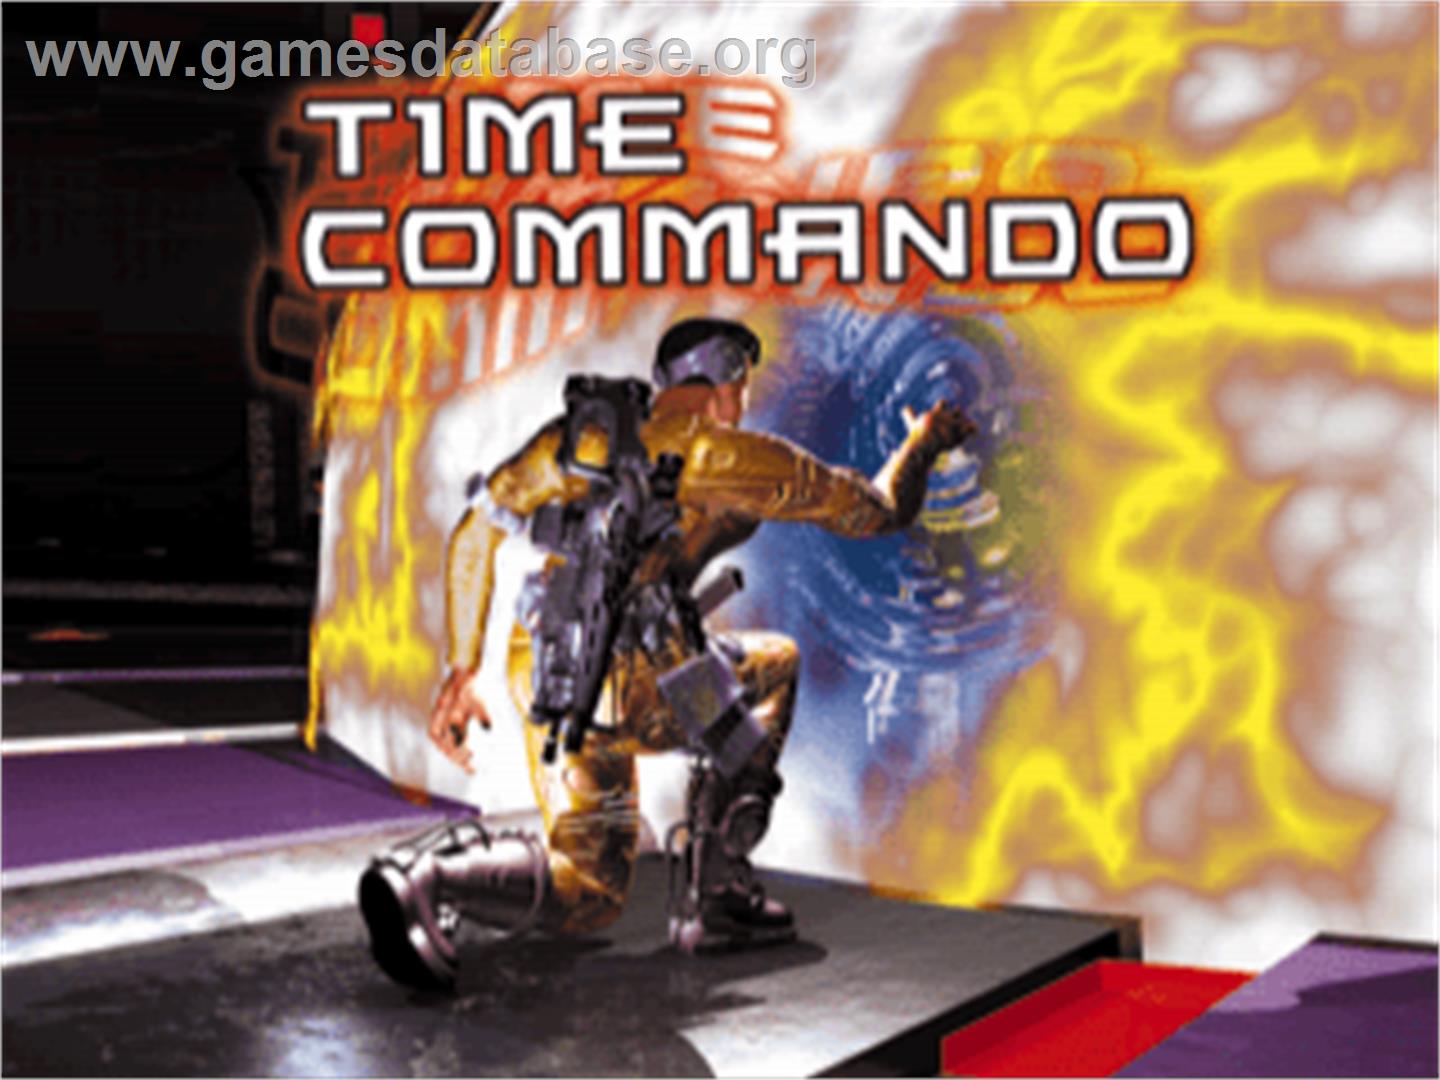 Time Commando - Sony Playstation - Artwork - Title Screen